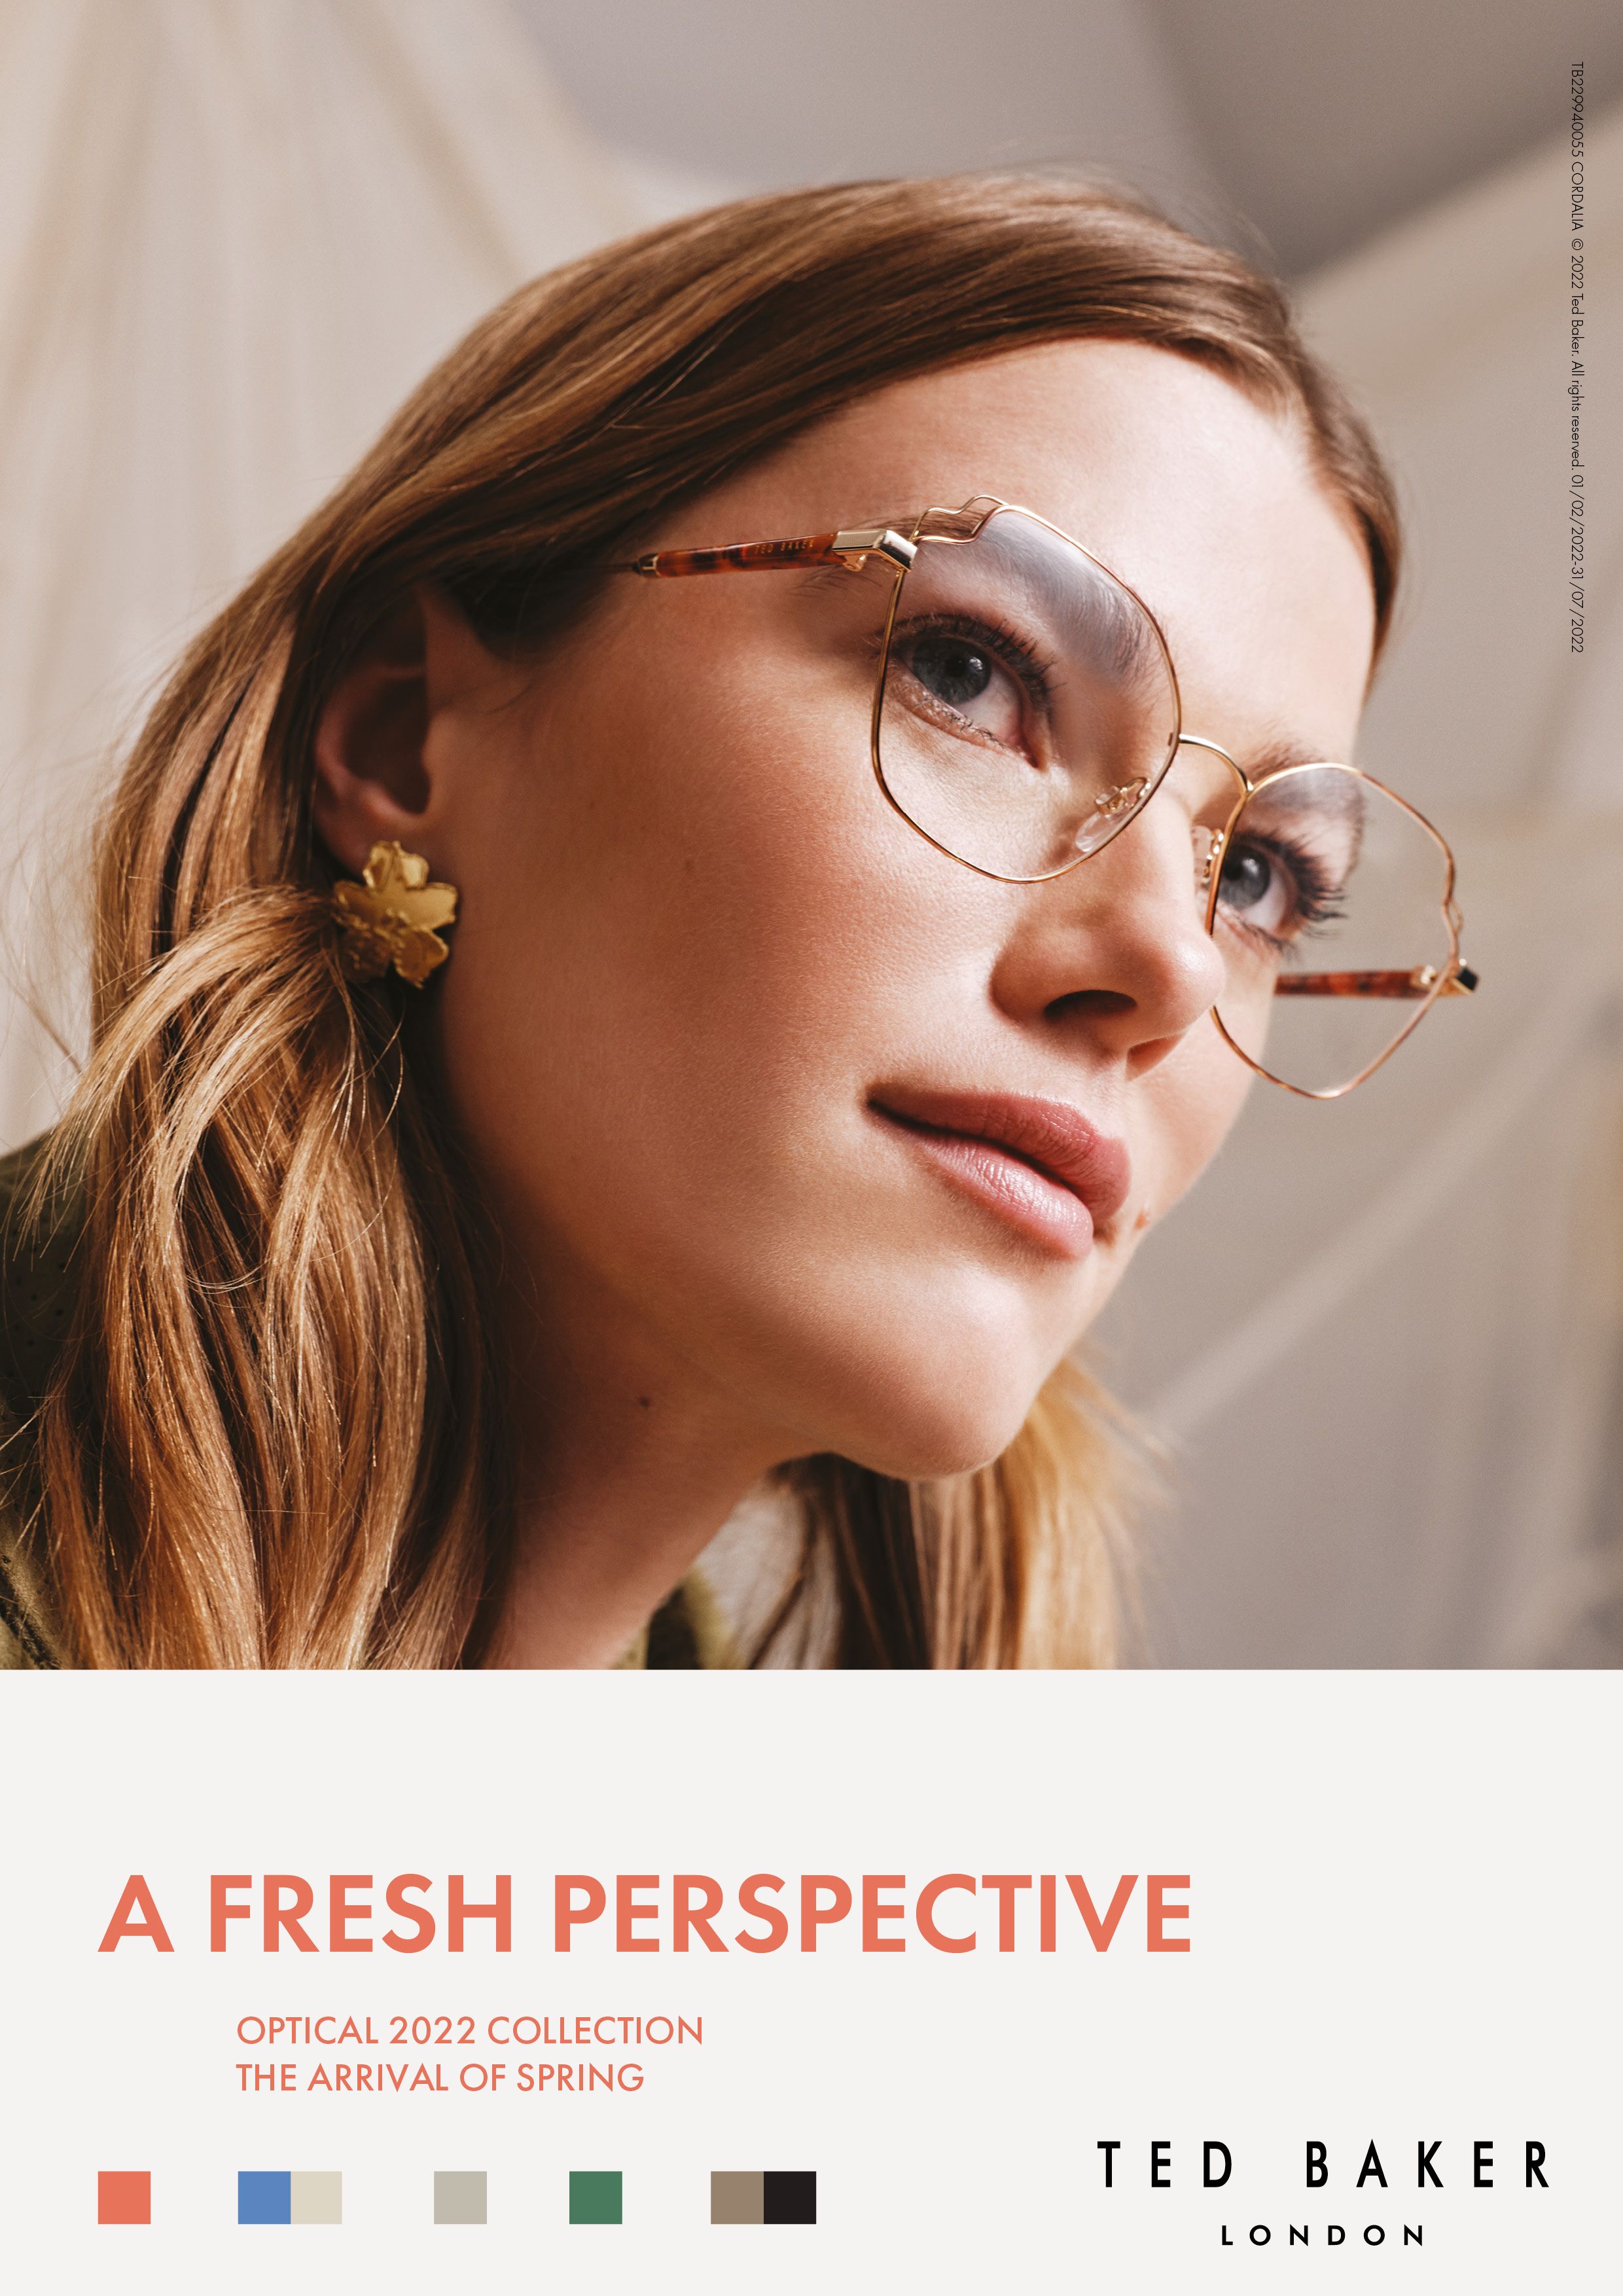 Ted Baker SS22 optical collection